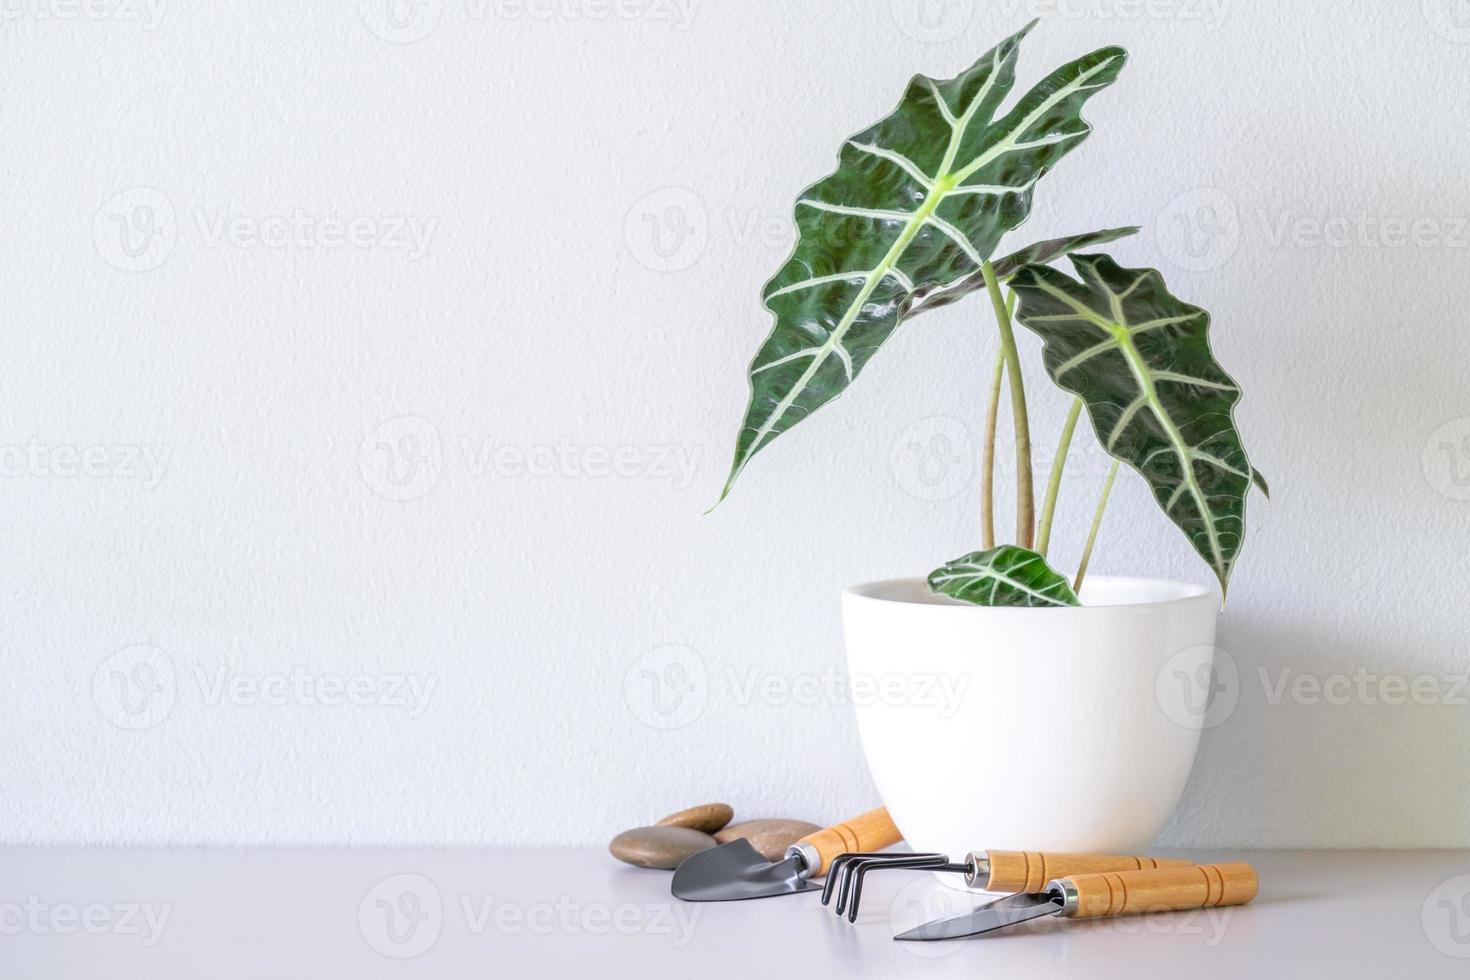 Alocasia sanderiana Bull or Alocasia Plant  on white ceramic pots with planters, peat, stones, on the tabletop and white wall background. photo